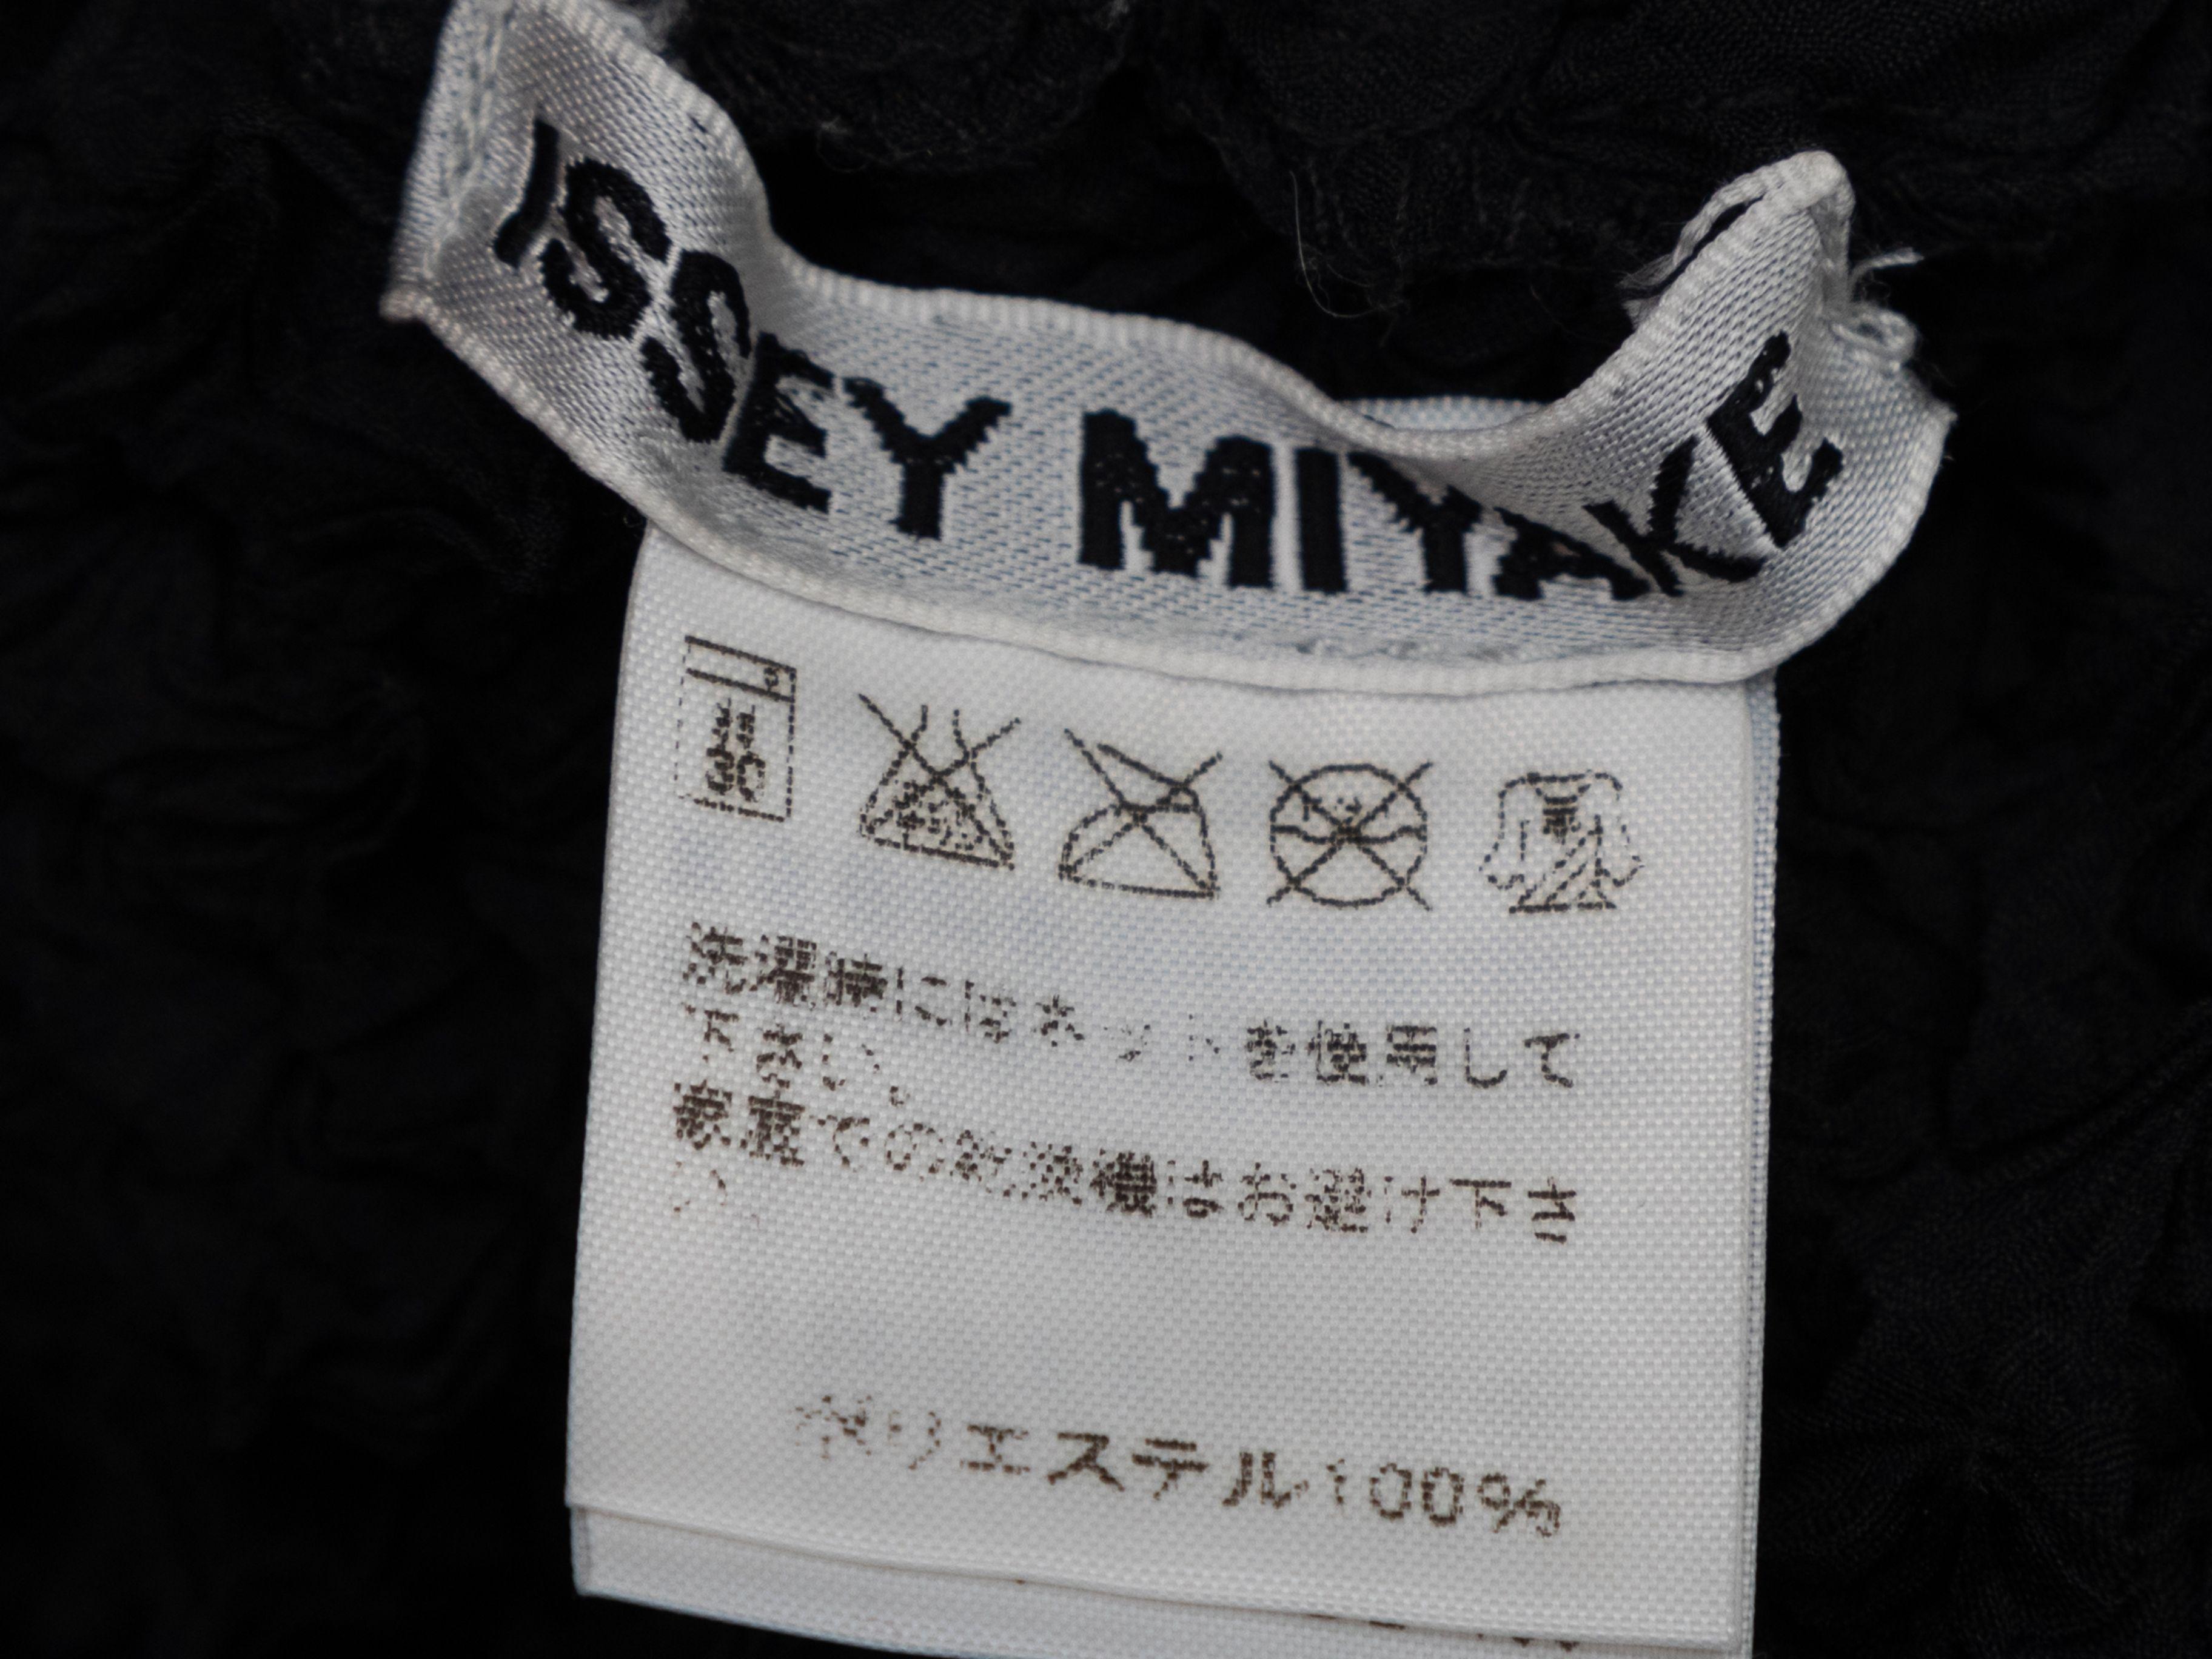 Product Details: Black popcorn texture long sleeve top by Issey Miyake. Pointed collar. Button closures at center front. 38